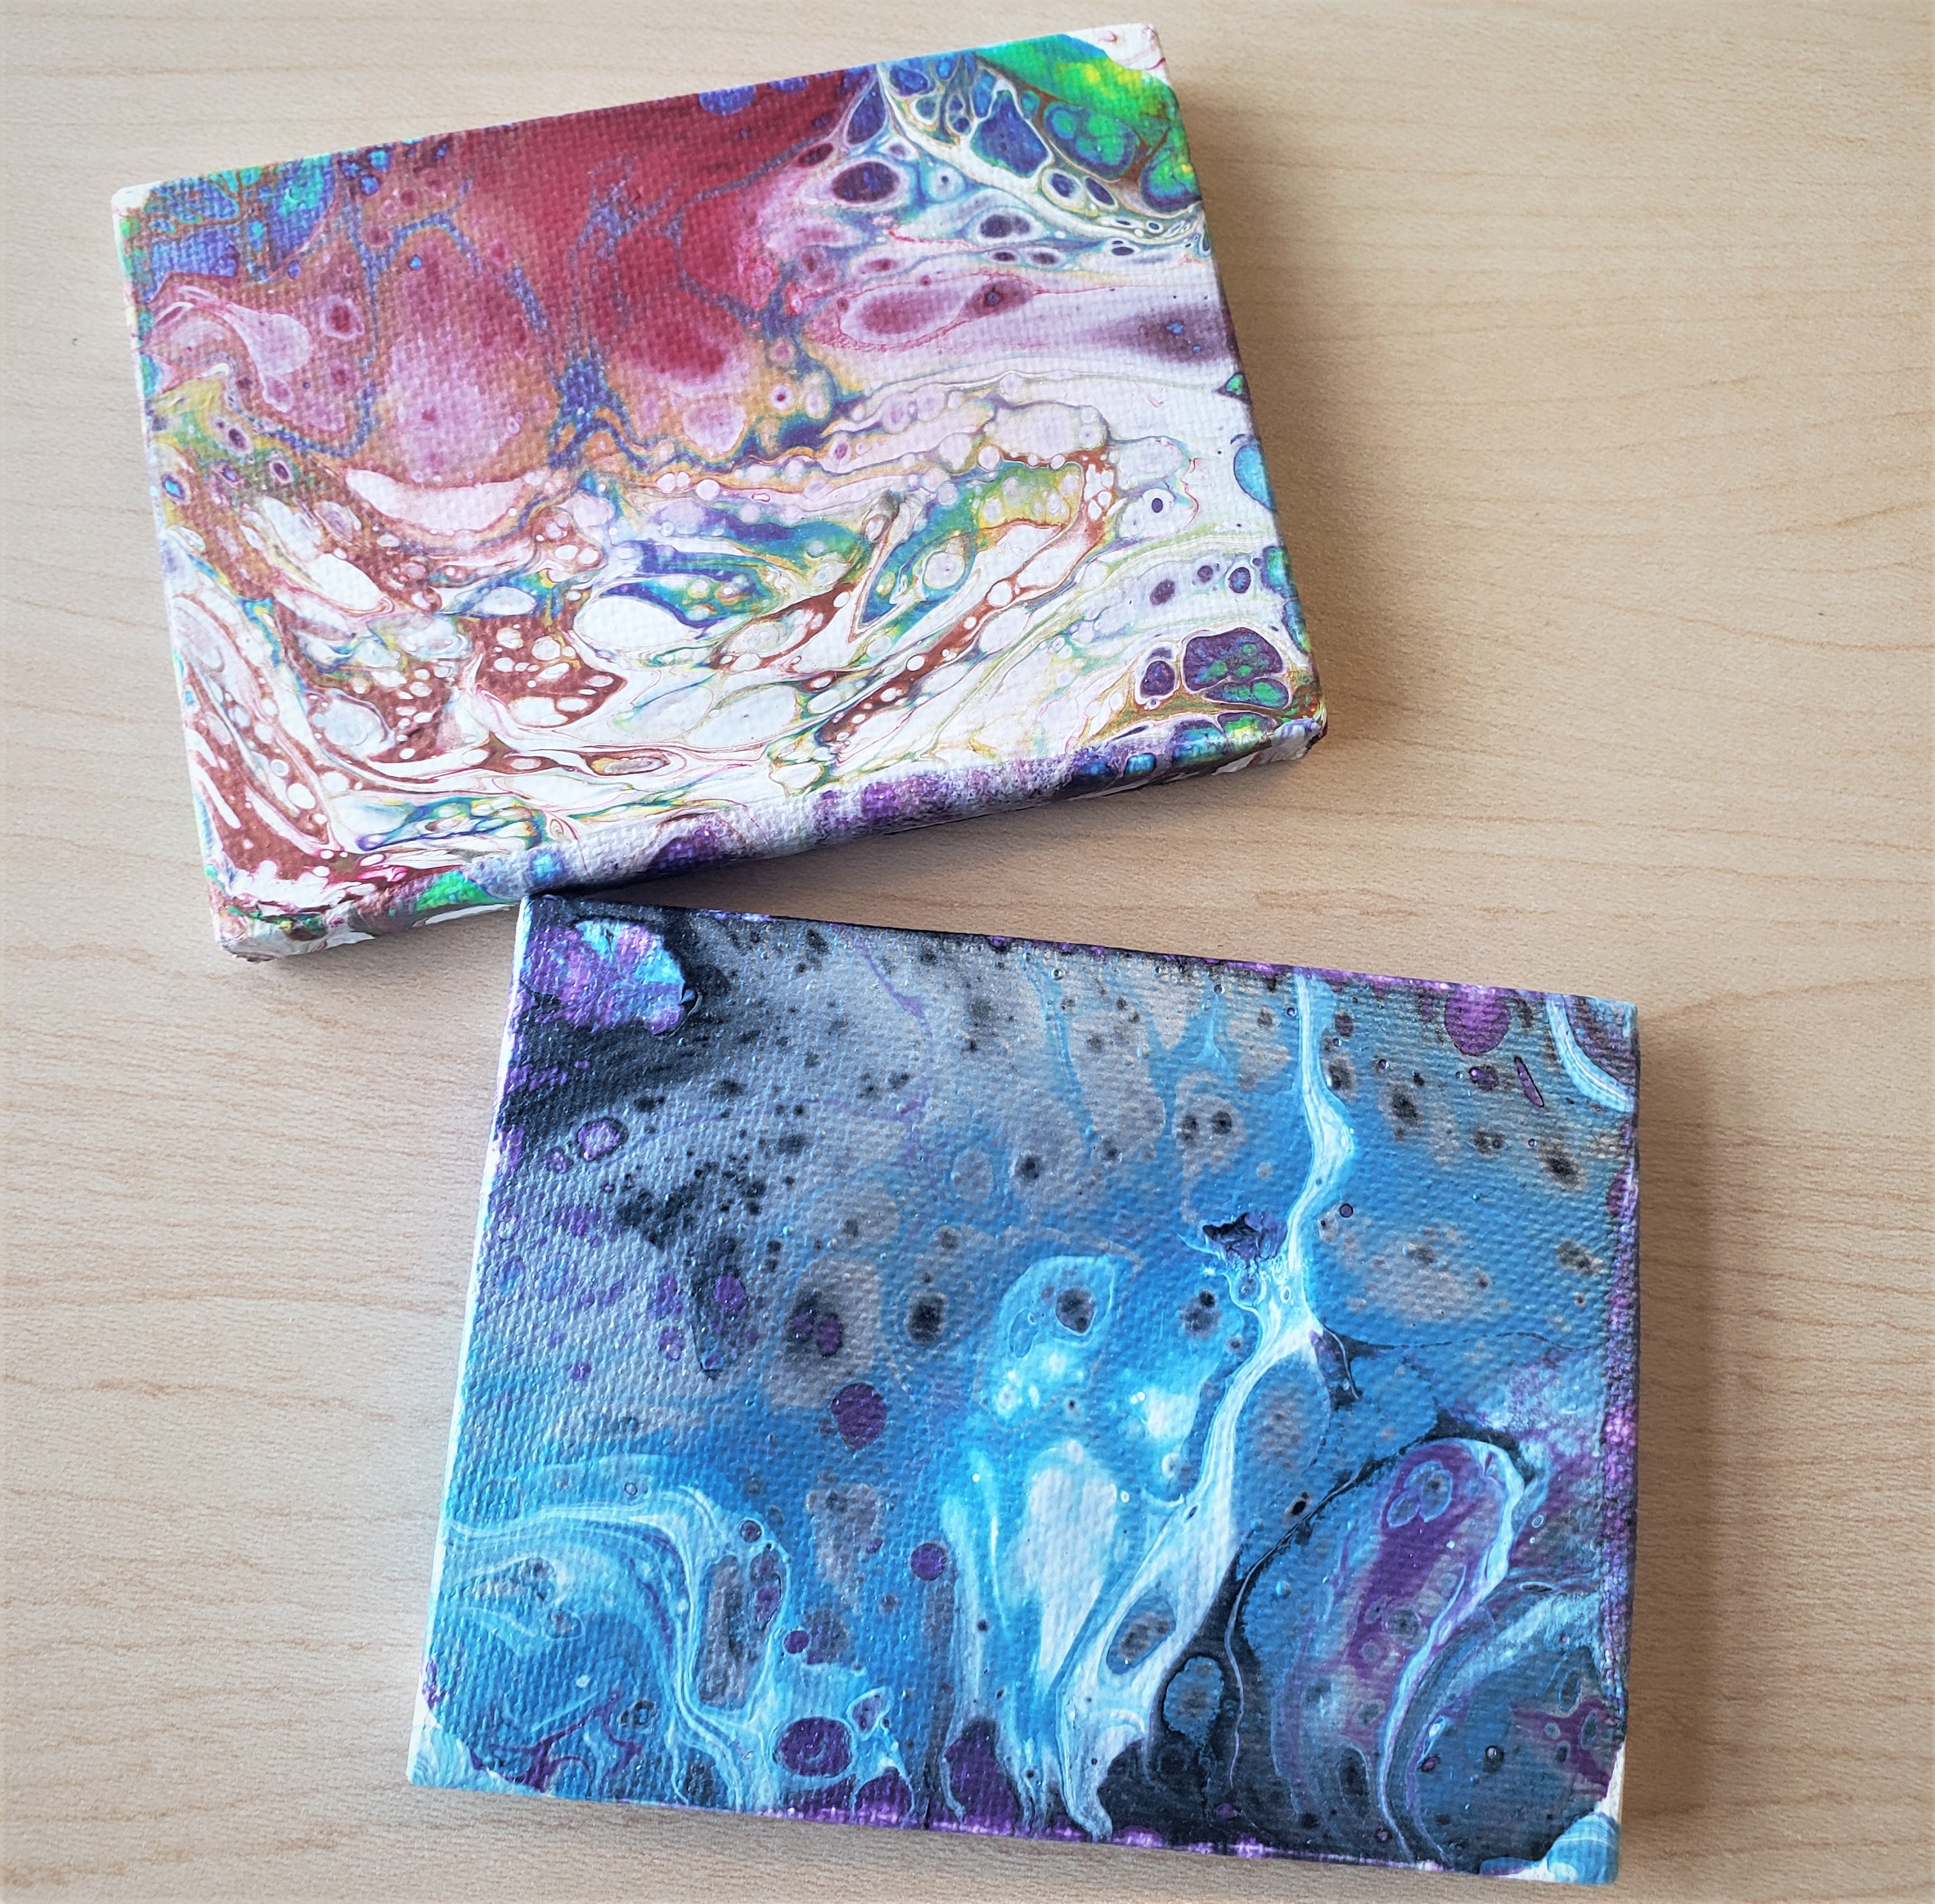 mini canvas with rainbow paint pouring and second mini canvas with cool paint pouring colors